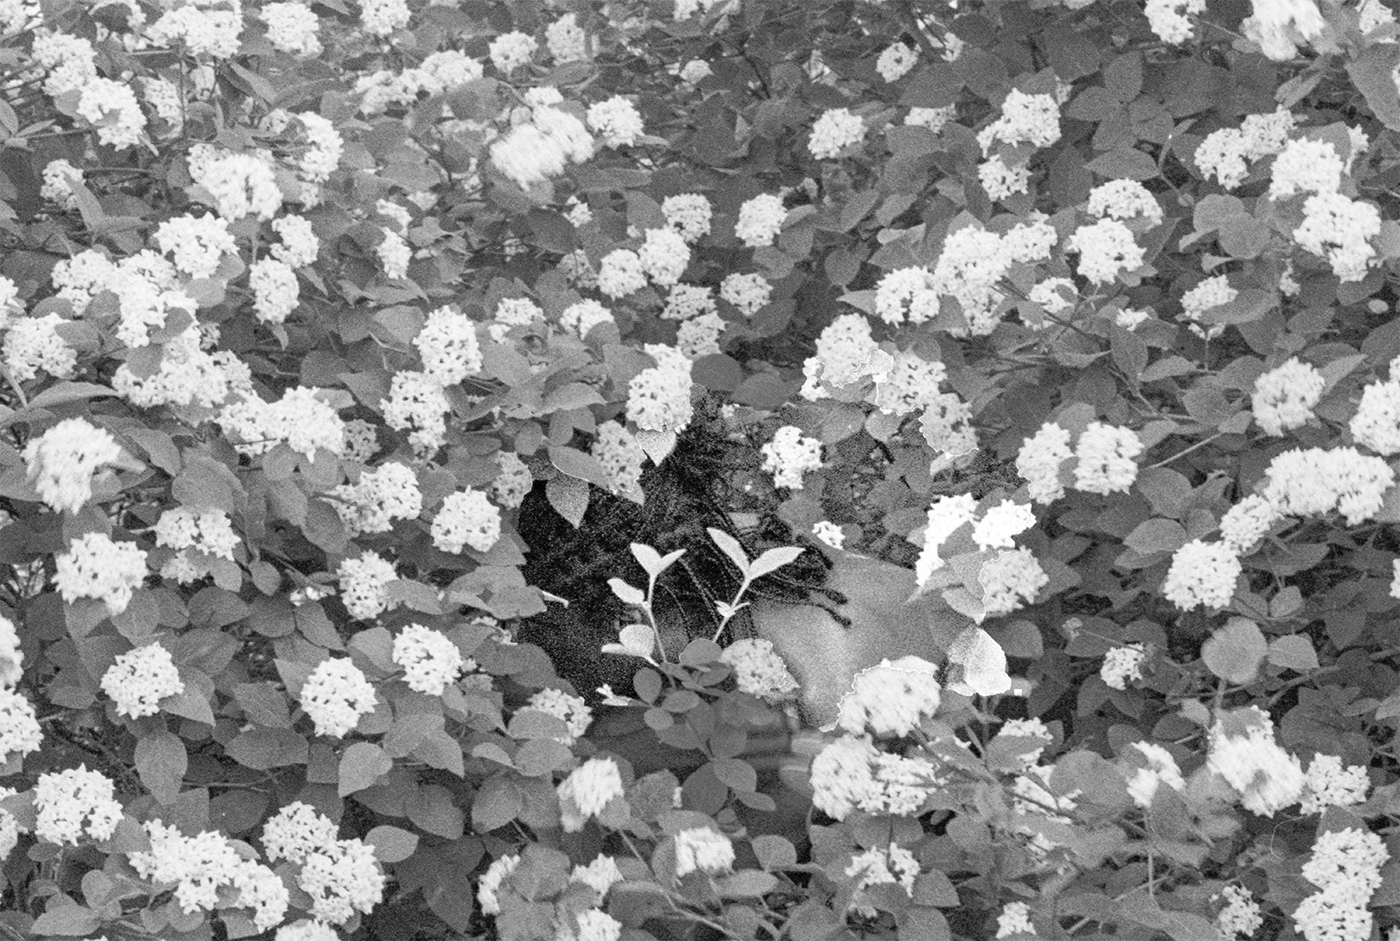 Photograph; a Black person crouching and enveloped in a field of white flowers with only the back of their head and bare back partially visible.